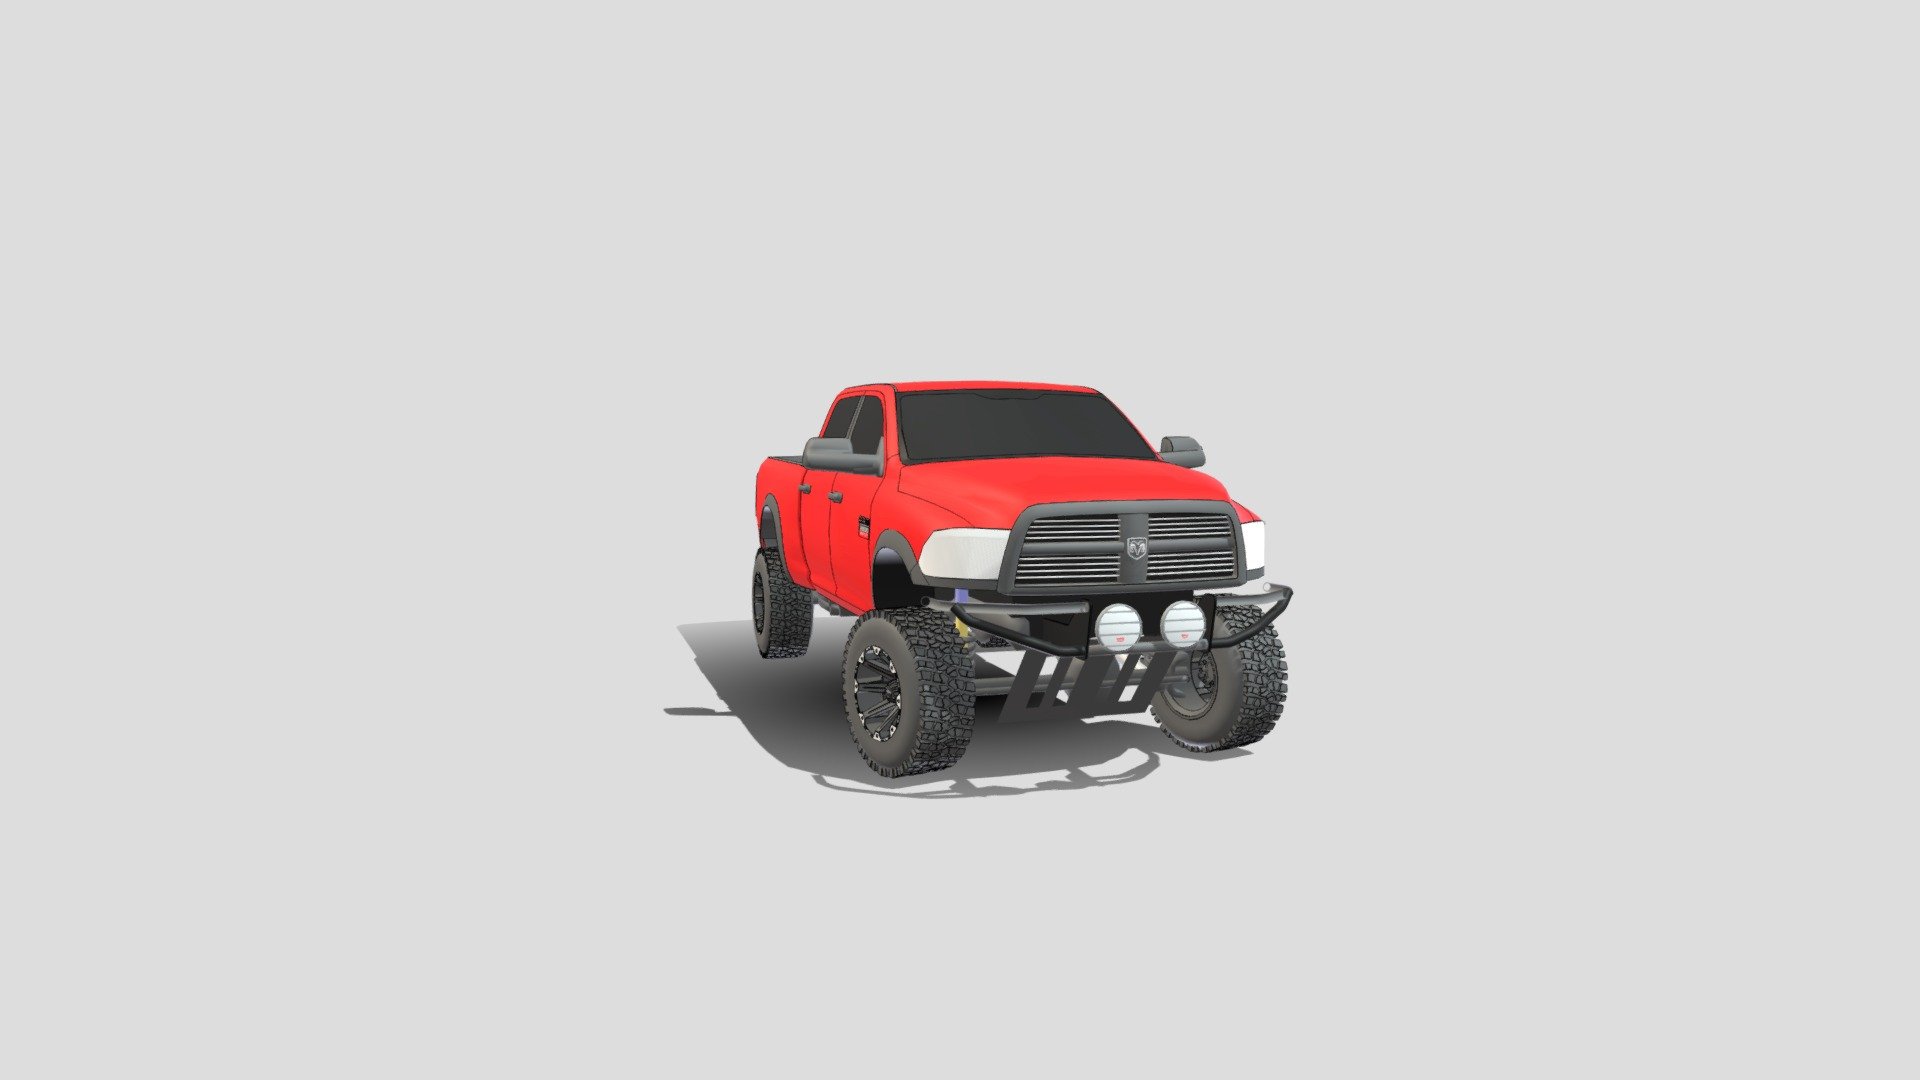 ✓
UPLOAD
Finished
2
PROCESSING
Our 3d elves are working hard…
3
READY TO PUBLISH

EDIT 3D SETTINGS

DUPLICATE (PRO)

RE-UPLOAD - 2012 Dodge Ram Runner - Download Free 3D model by David_Holiday 3d model